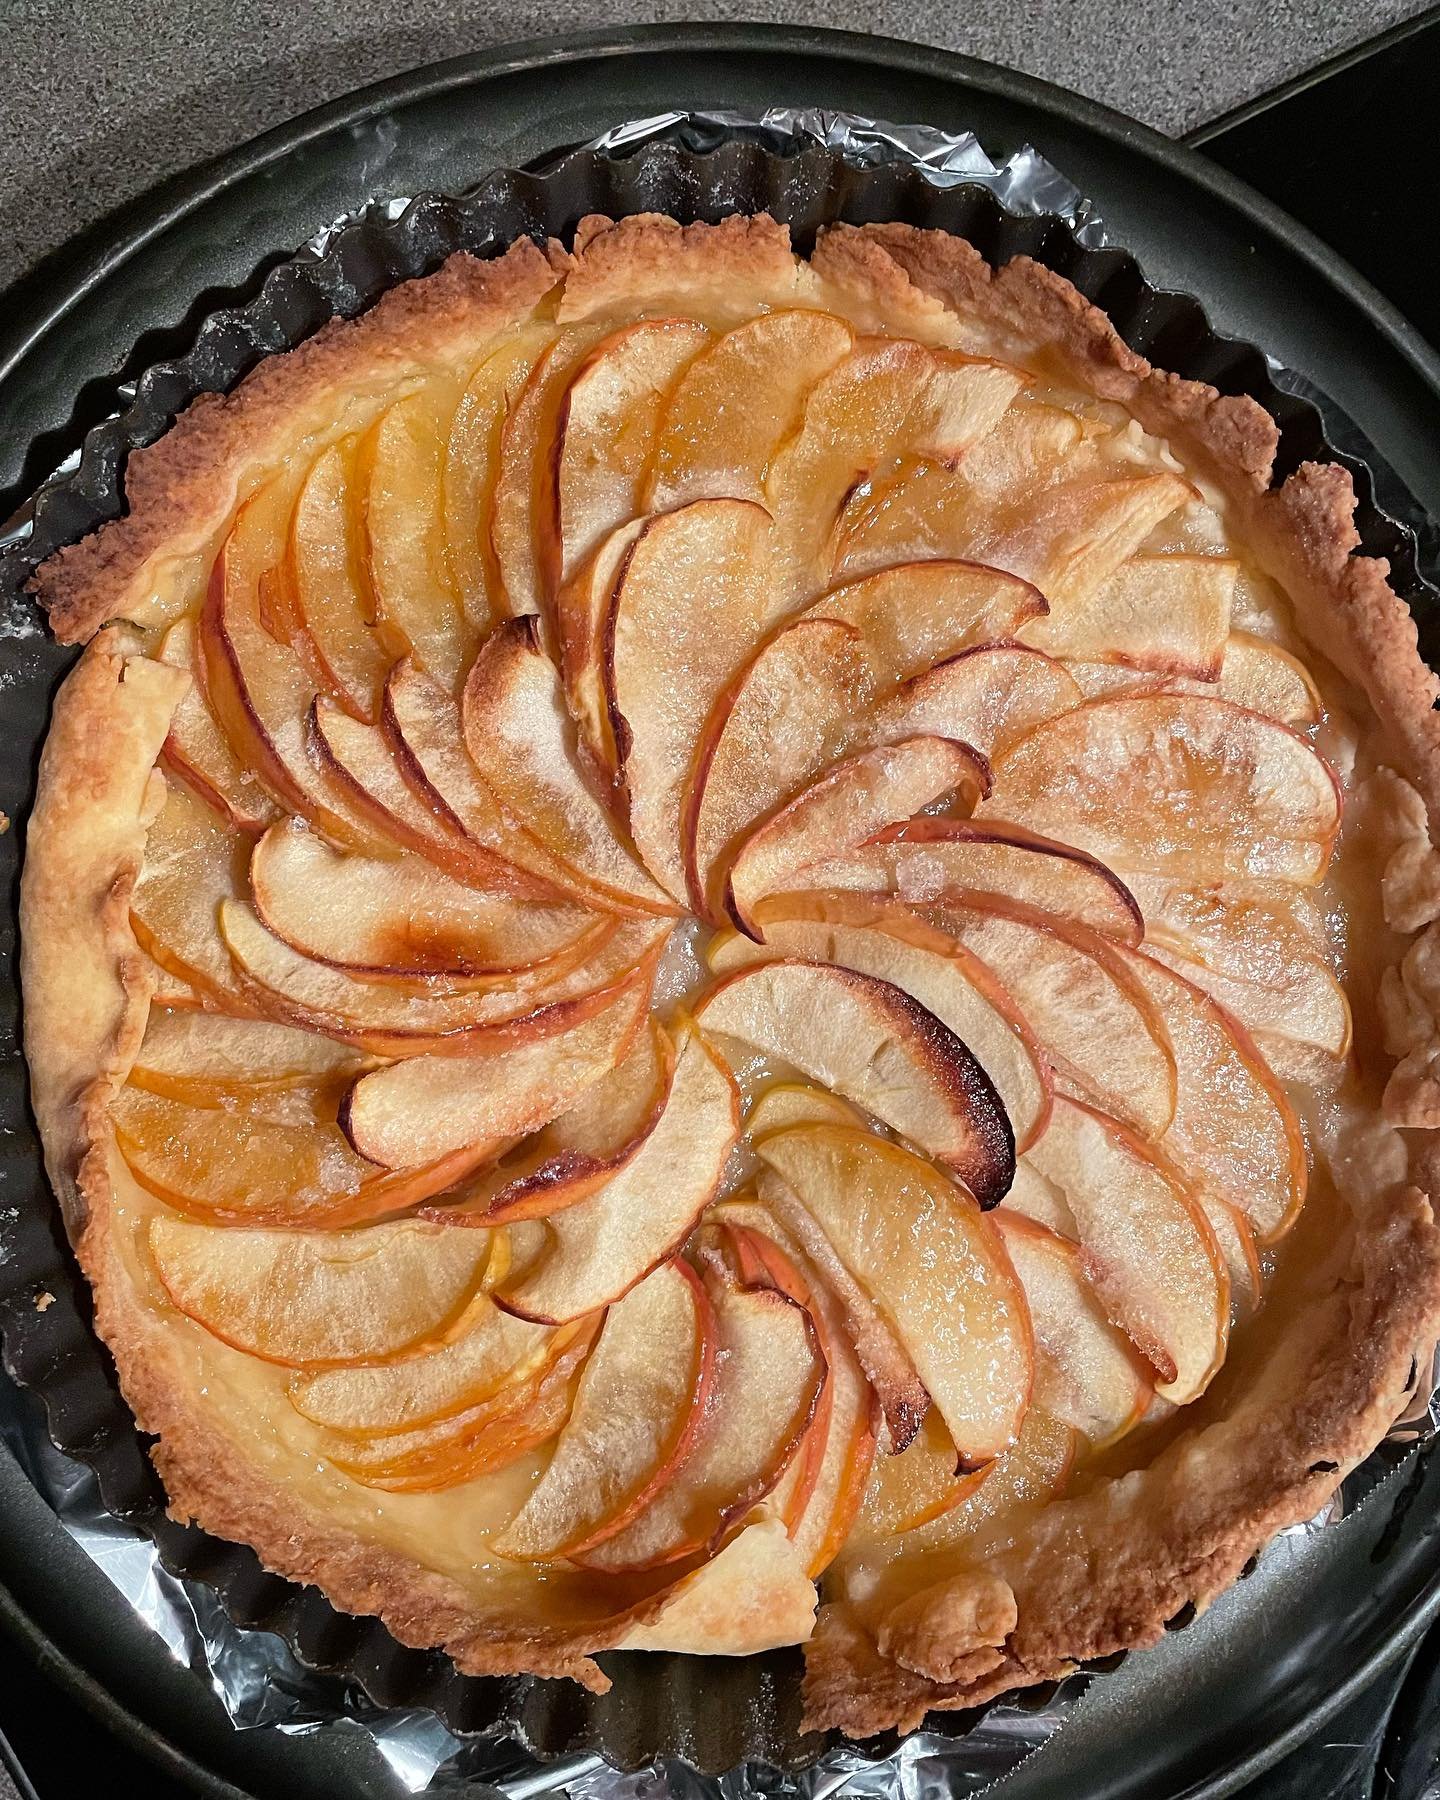 Fine Apple Tart recipe from @sbsfood and @adamliaw  The Cook Up. Can&rsquo;t wait to taste it. Cream or ice cream?
#appletart #tarteauxpommes #sbsfood #thecookup #pastry #frenchcooking #frenchviews